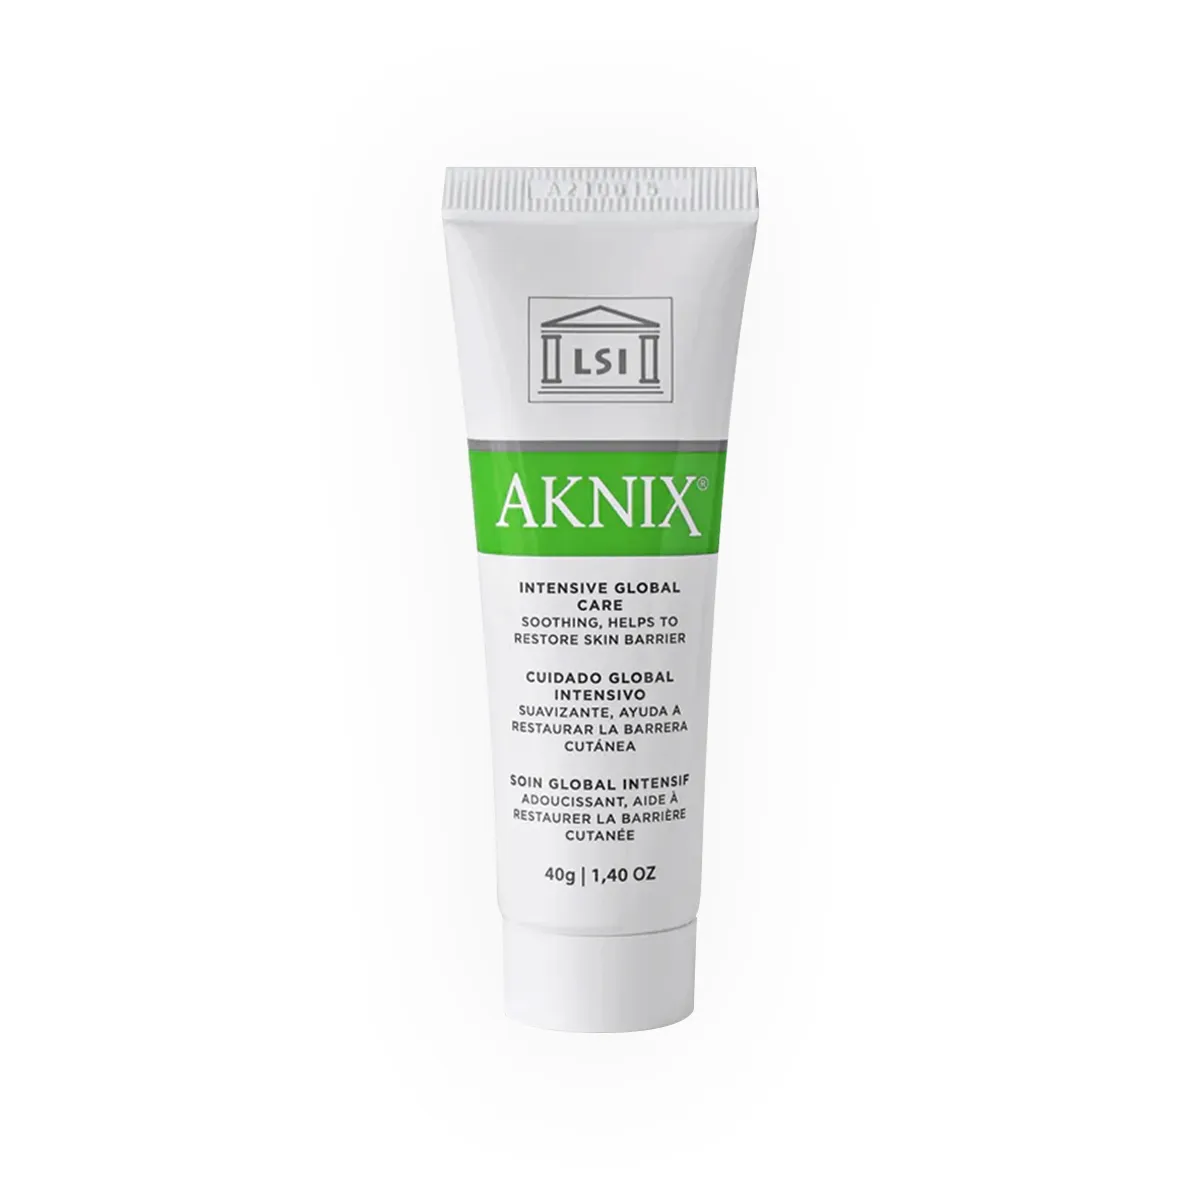 First product image of Aknix Intensive Global Care cream 40g